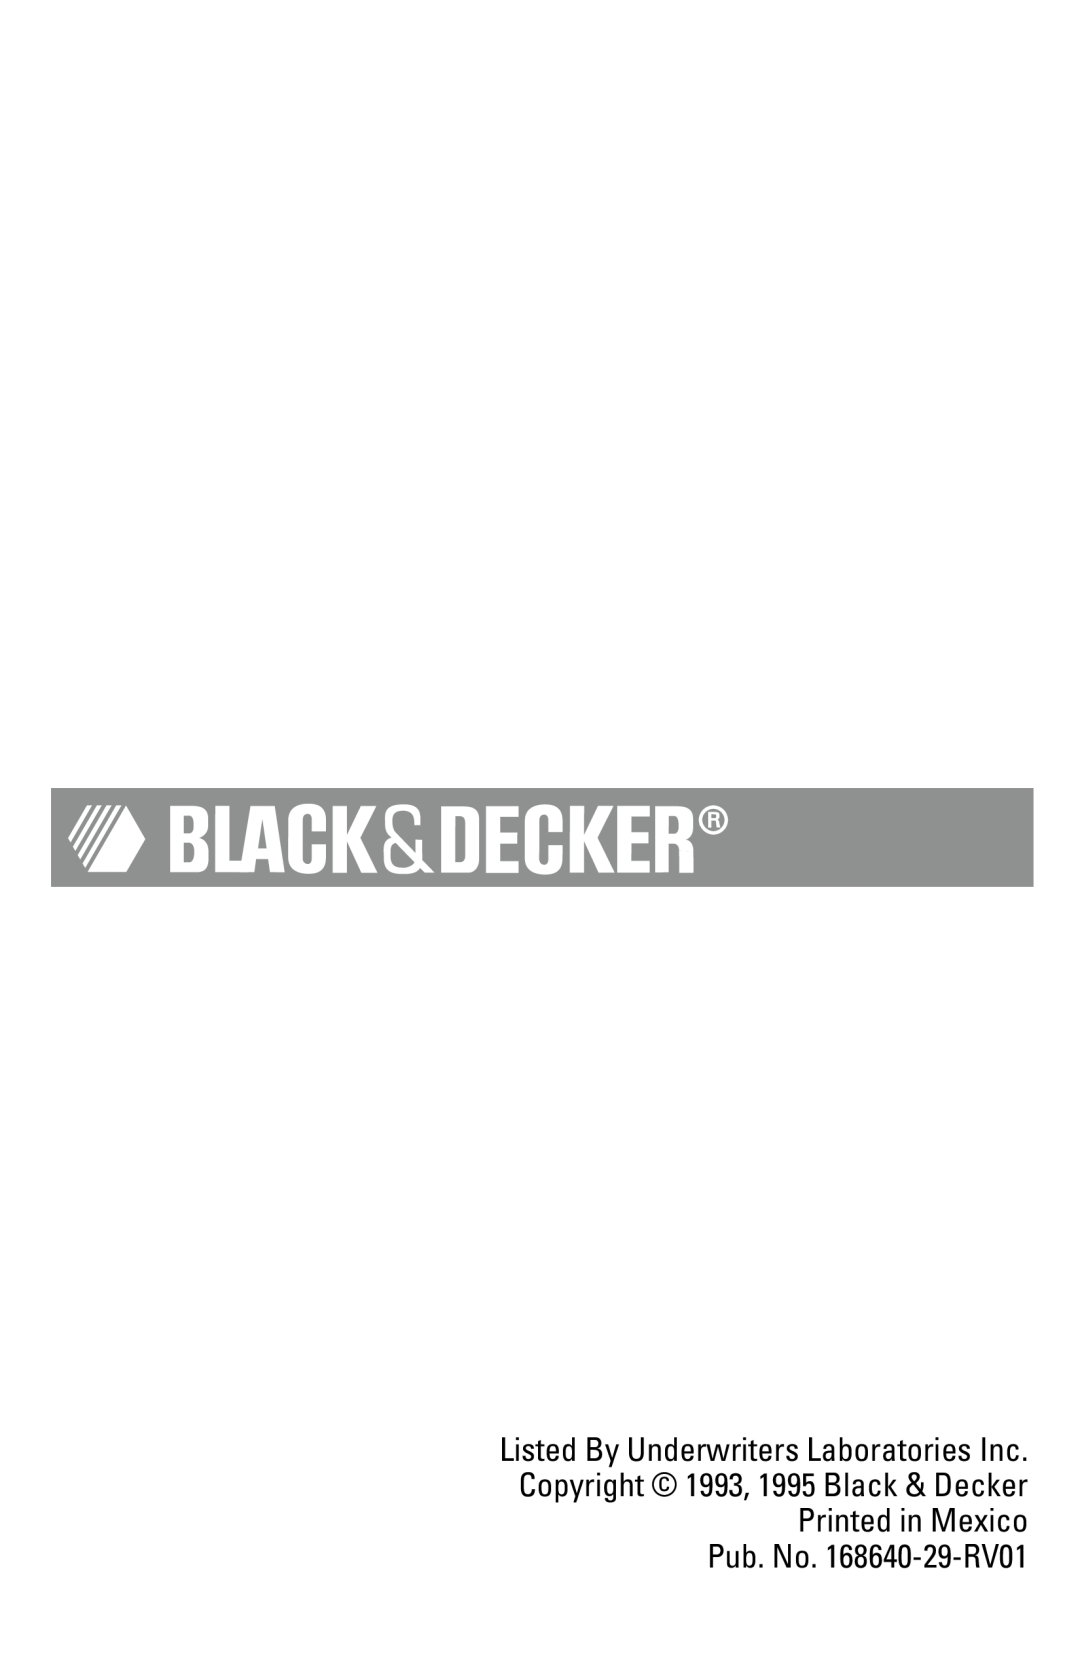 Black & Decker F855S manual Listed By Underwriters Laboratories Inc, Printed in Mexico, Copyright 1993, 1995 Black & Decker 